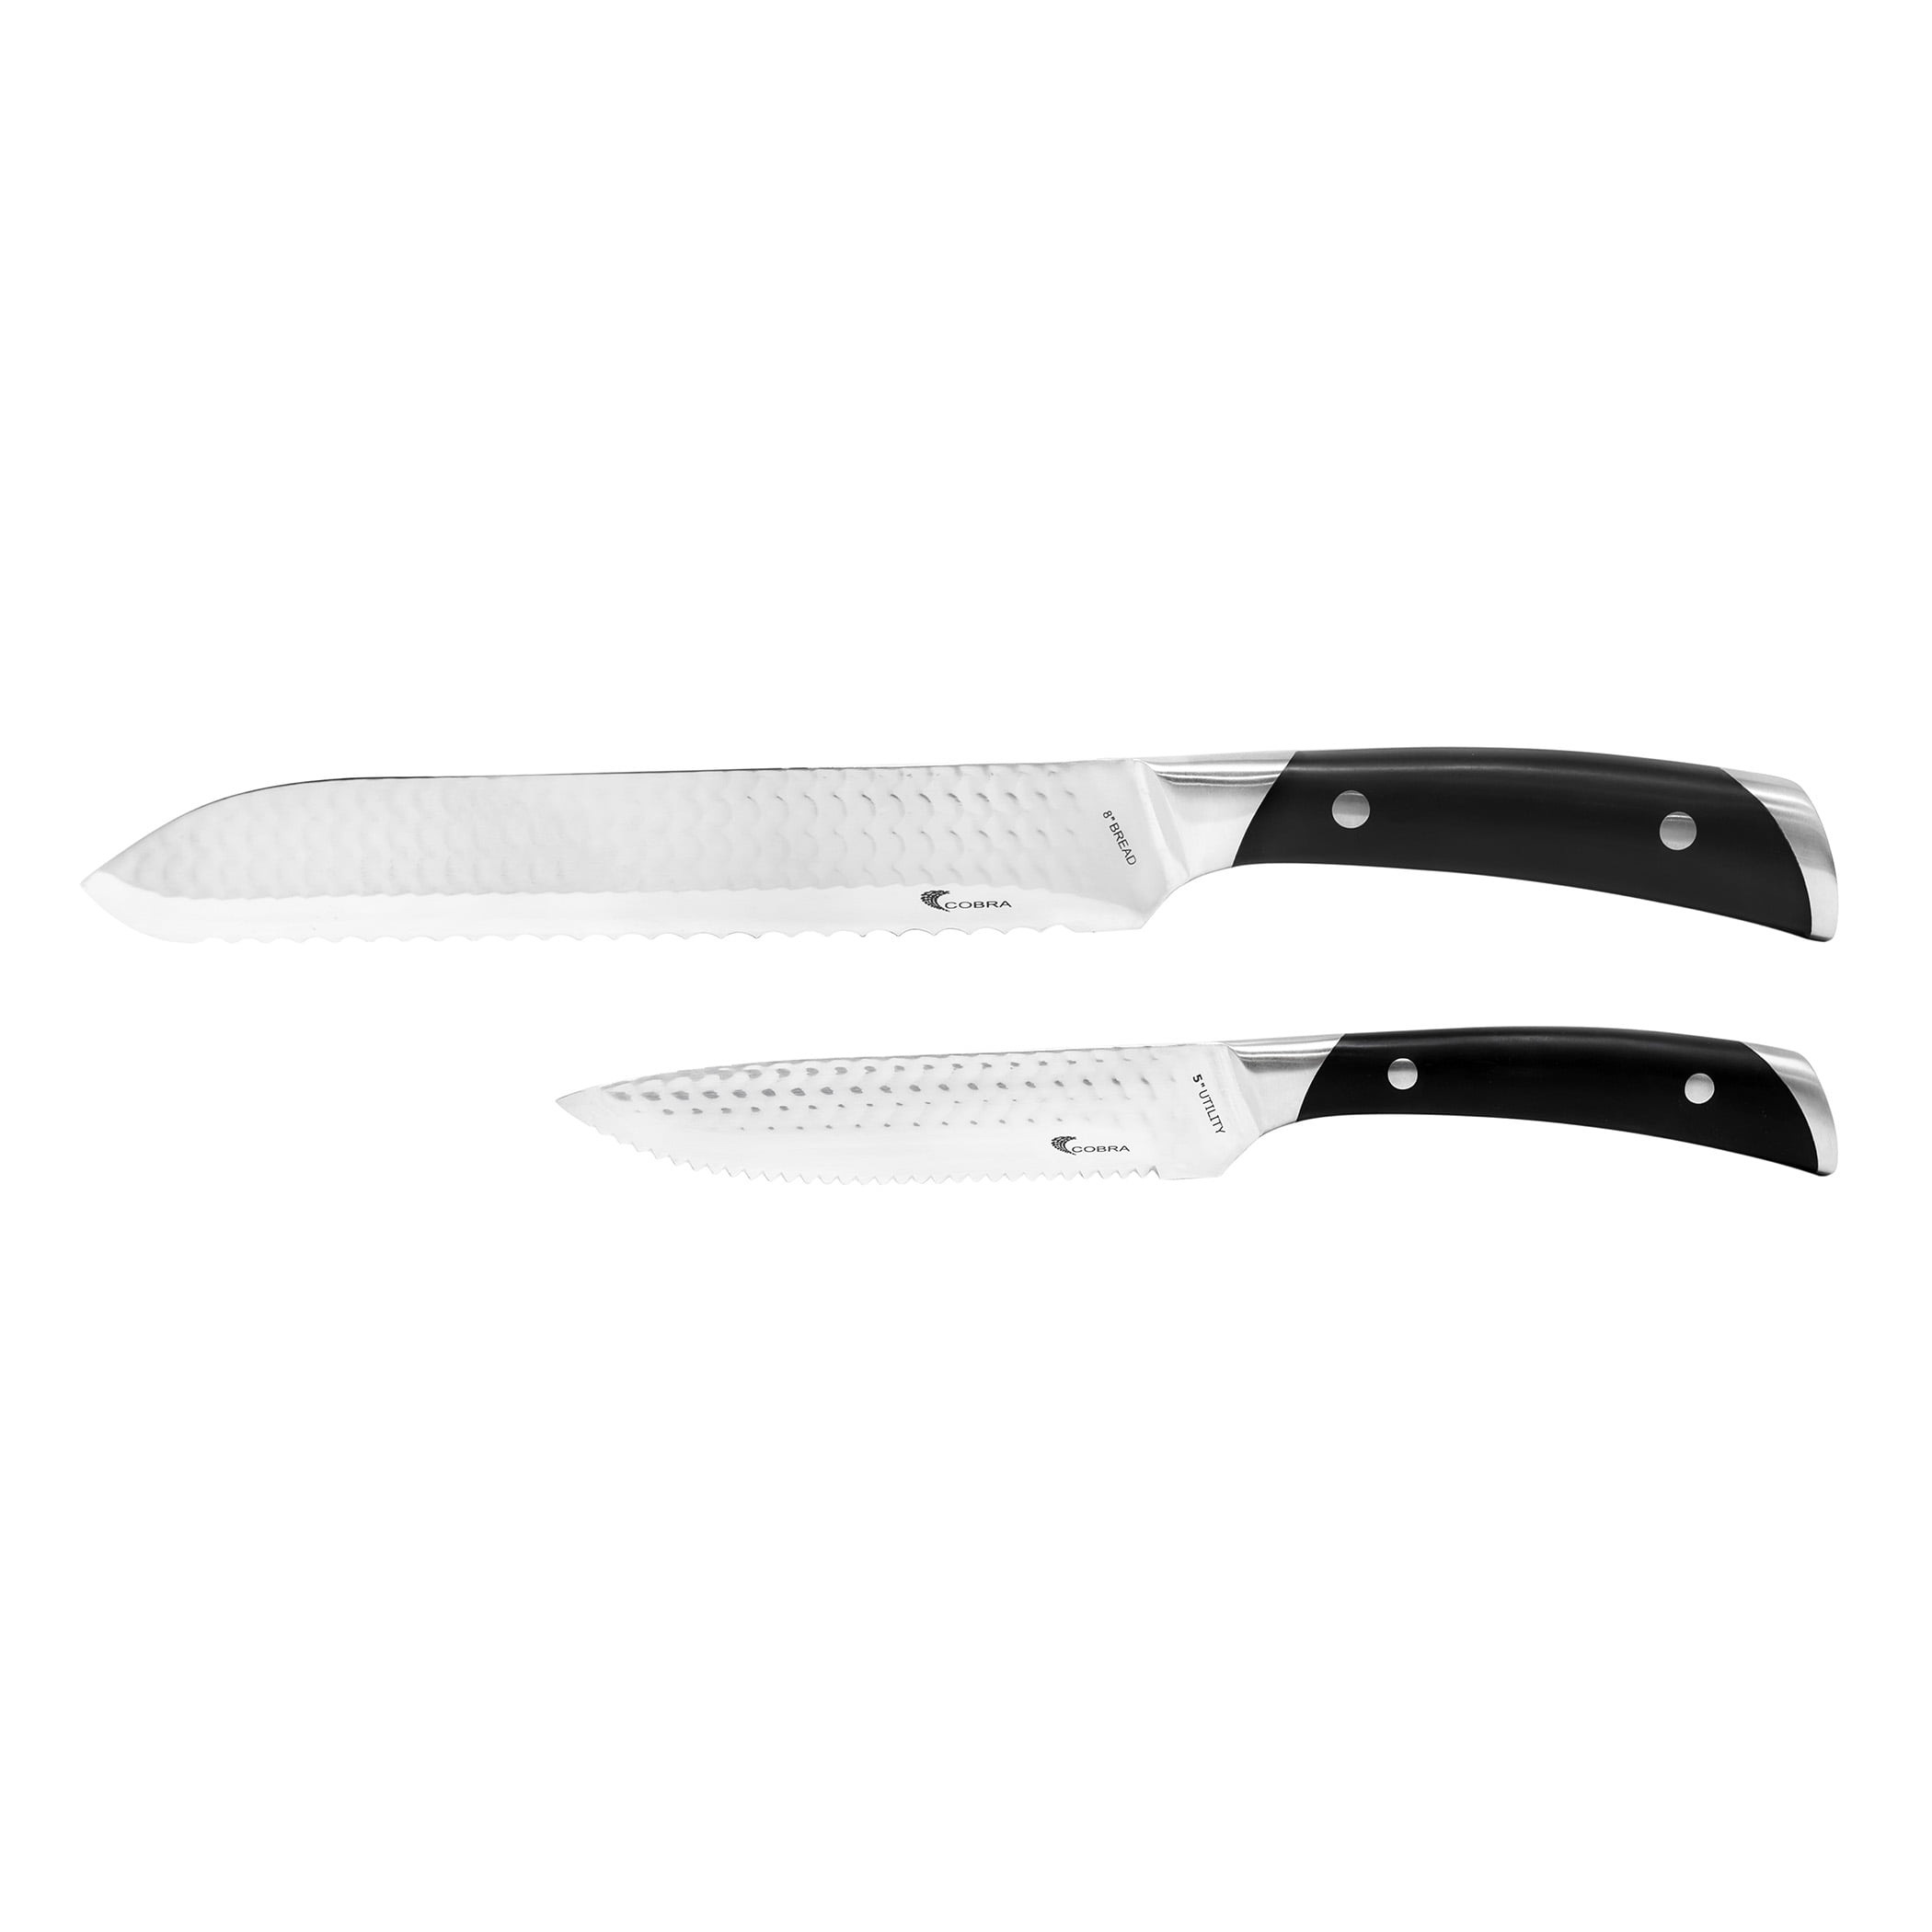 Pro Series 2.0 6 Chef Knife with Kullens, 1 count - Kroger